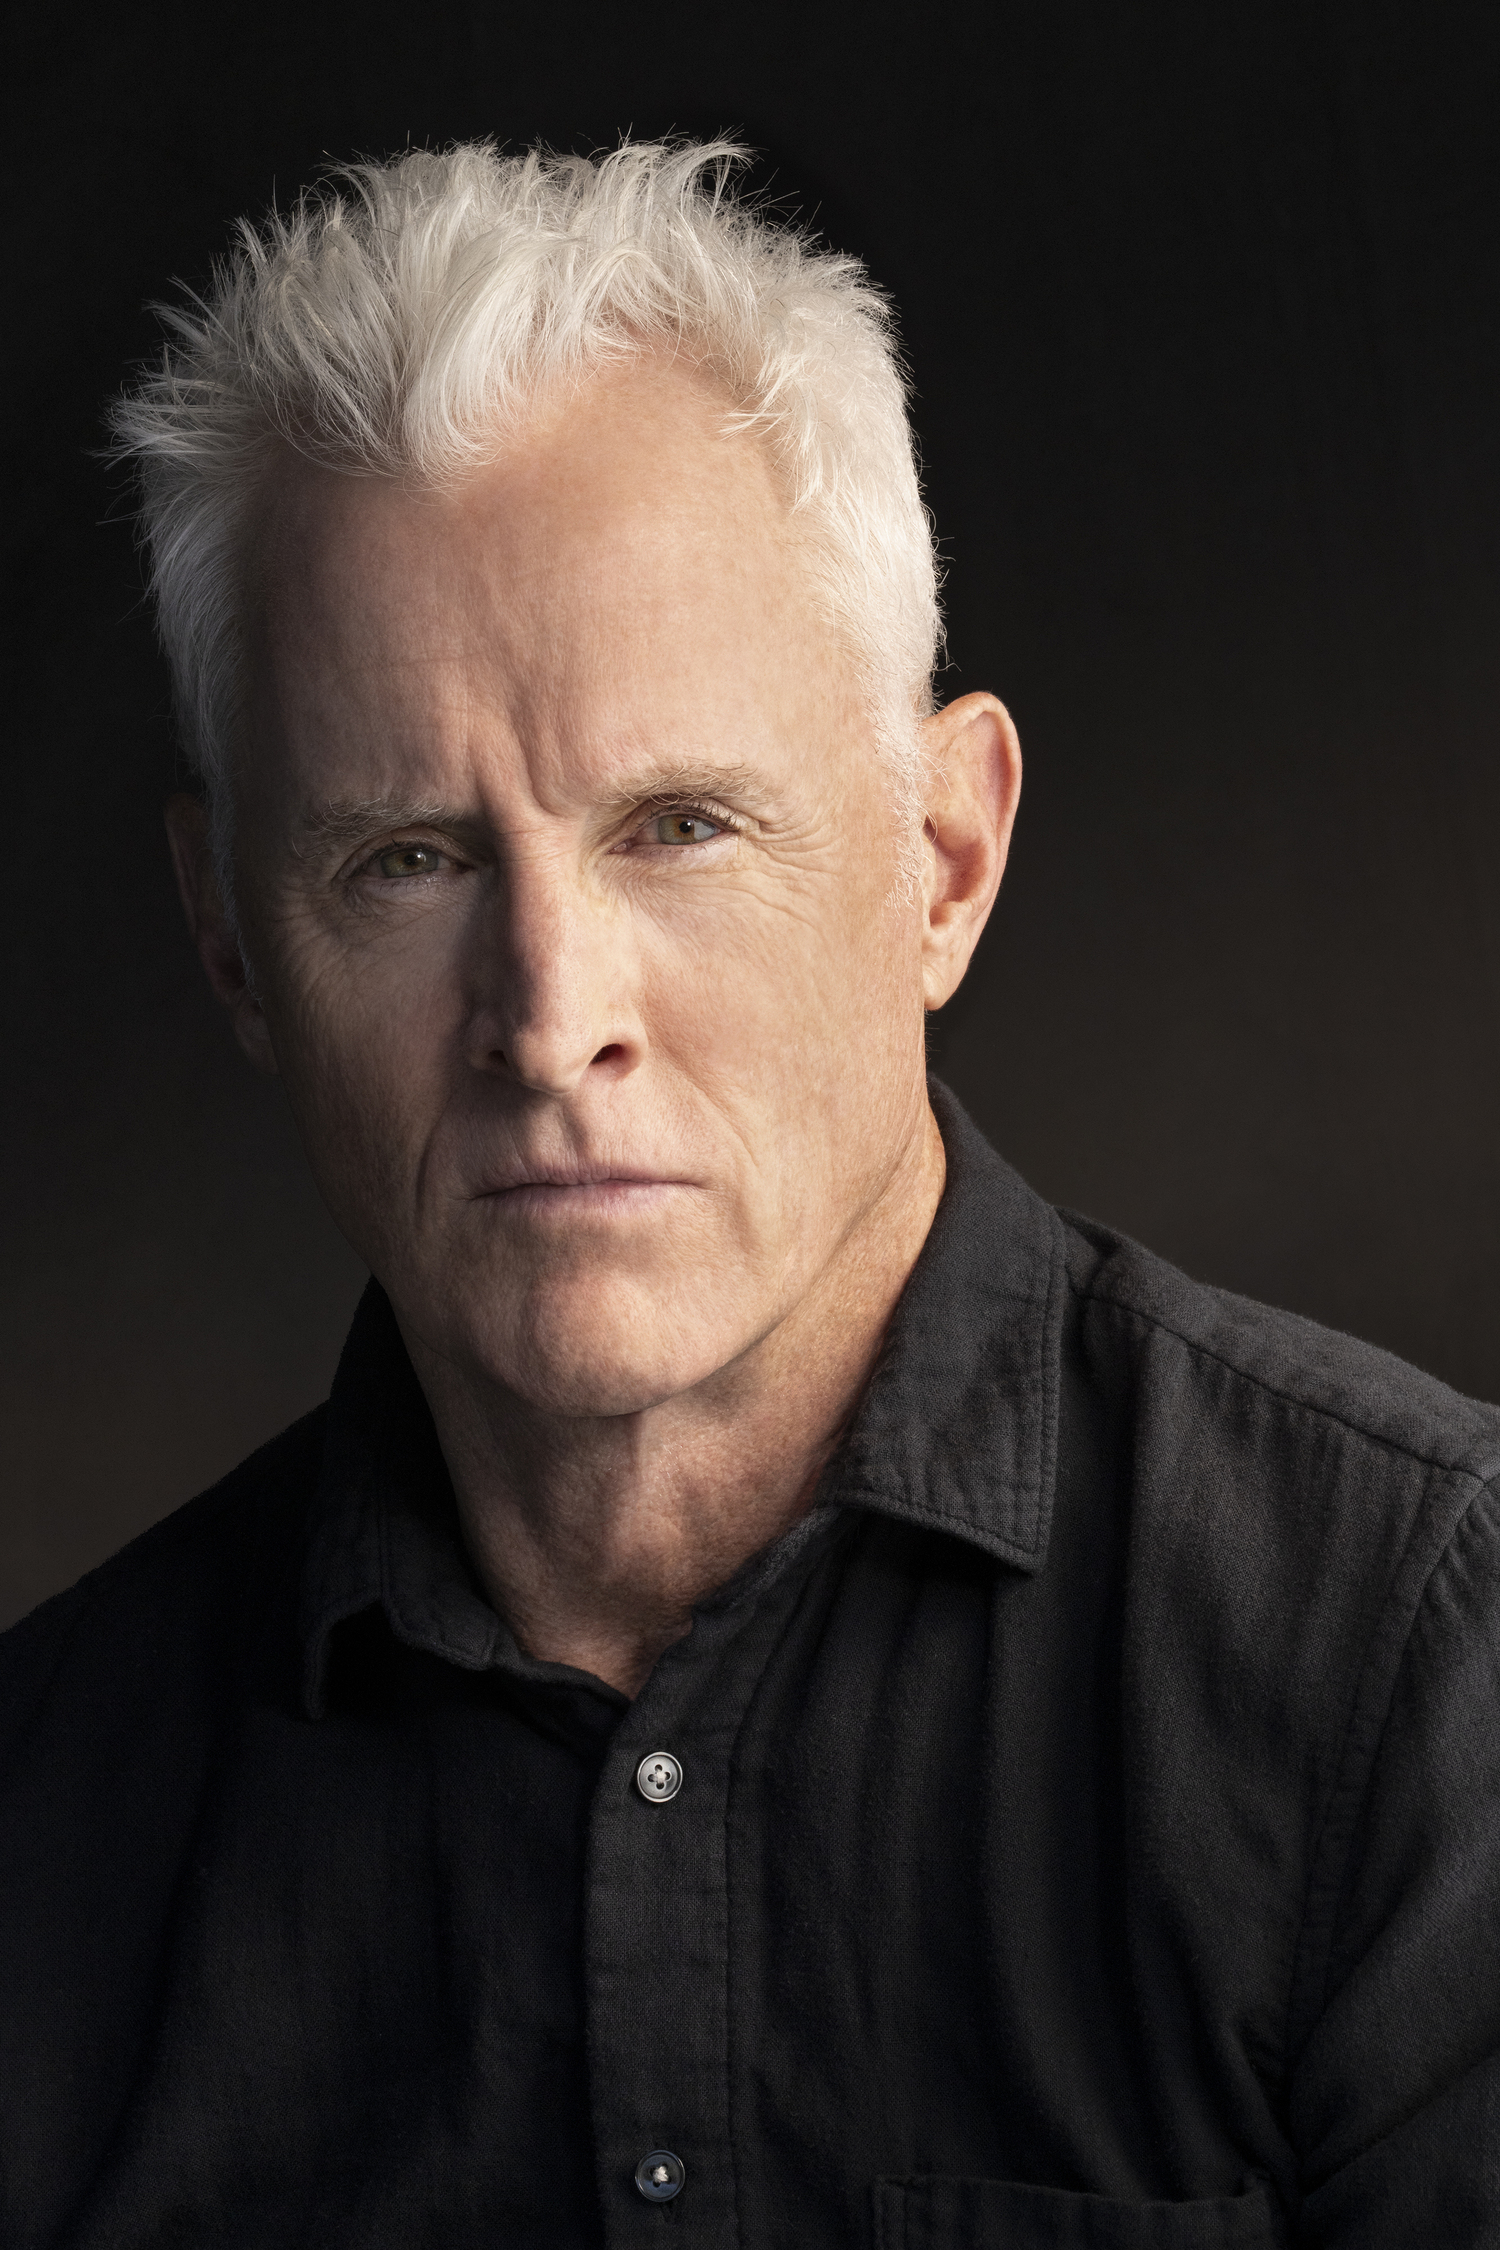 John Slattery stars in Bay Street Theater’s production of Frank D. Gilroy's drama “The Subject Was Roses,” alongside his wife, Talia Balsam, and son Harry Slattery. The play, directed by Scott Wittman, begins with previews on May 28. GREG GORMAN